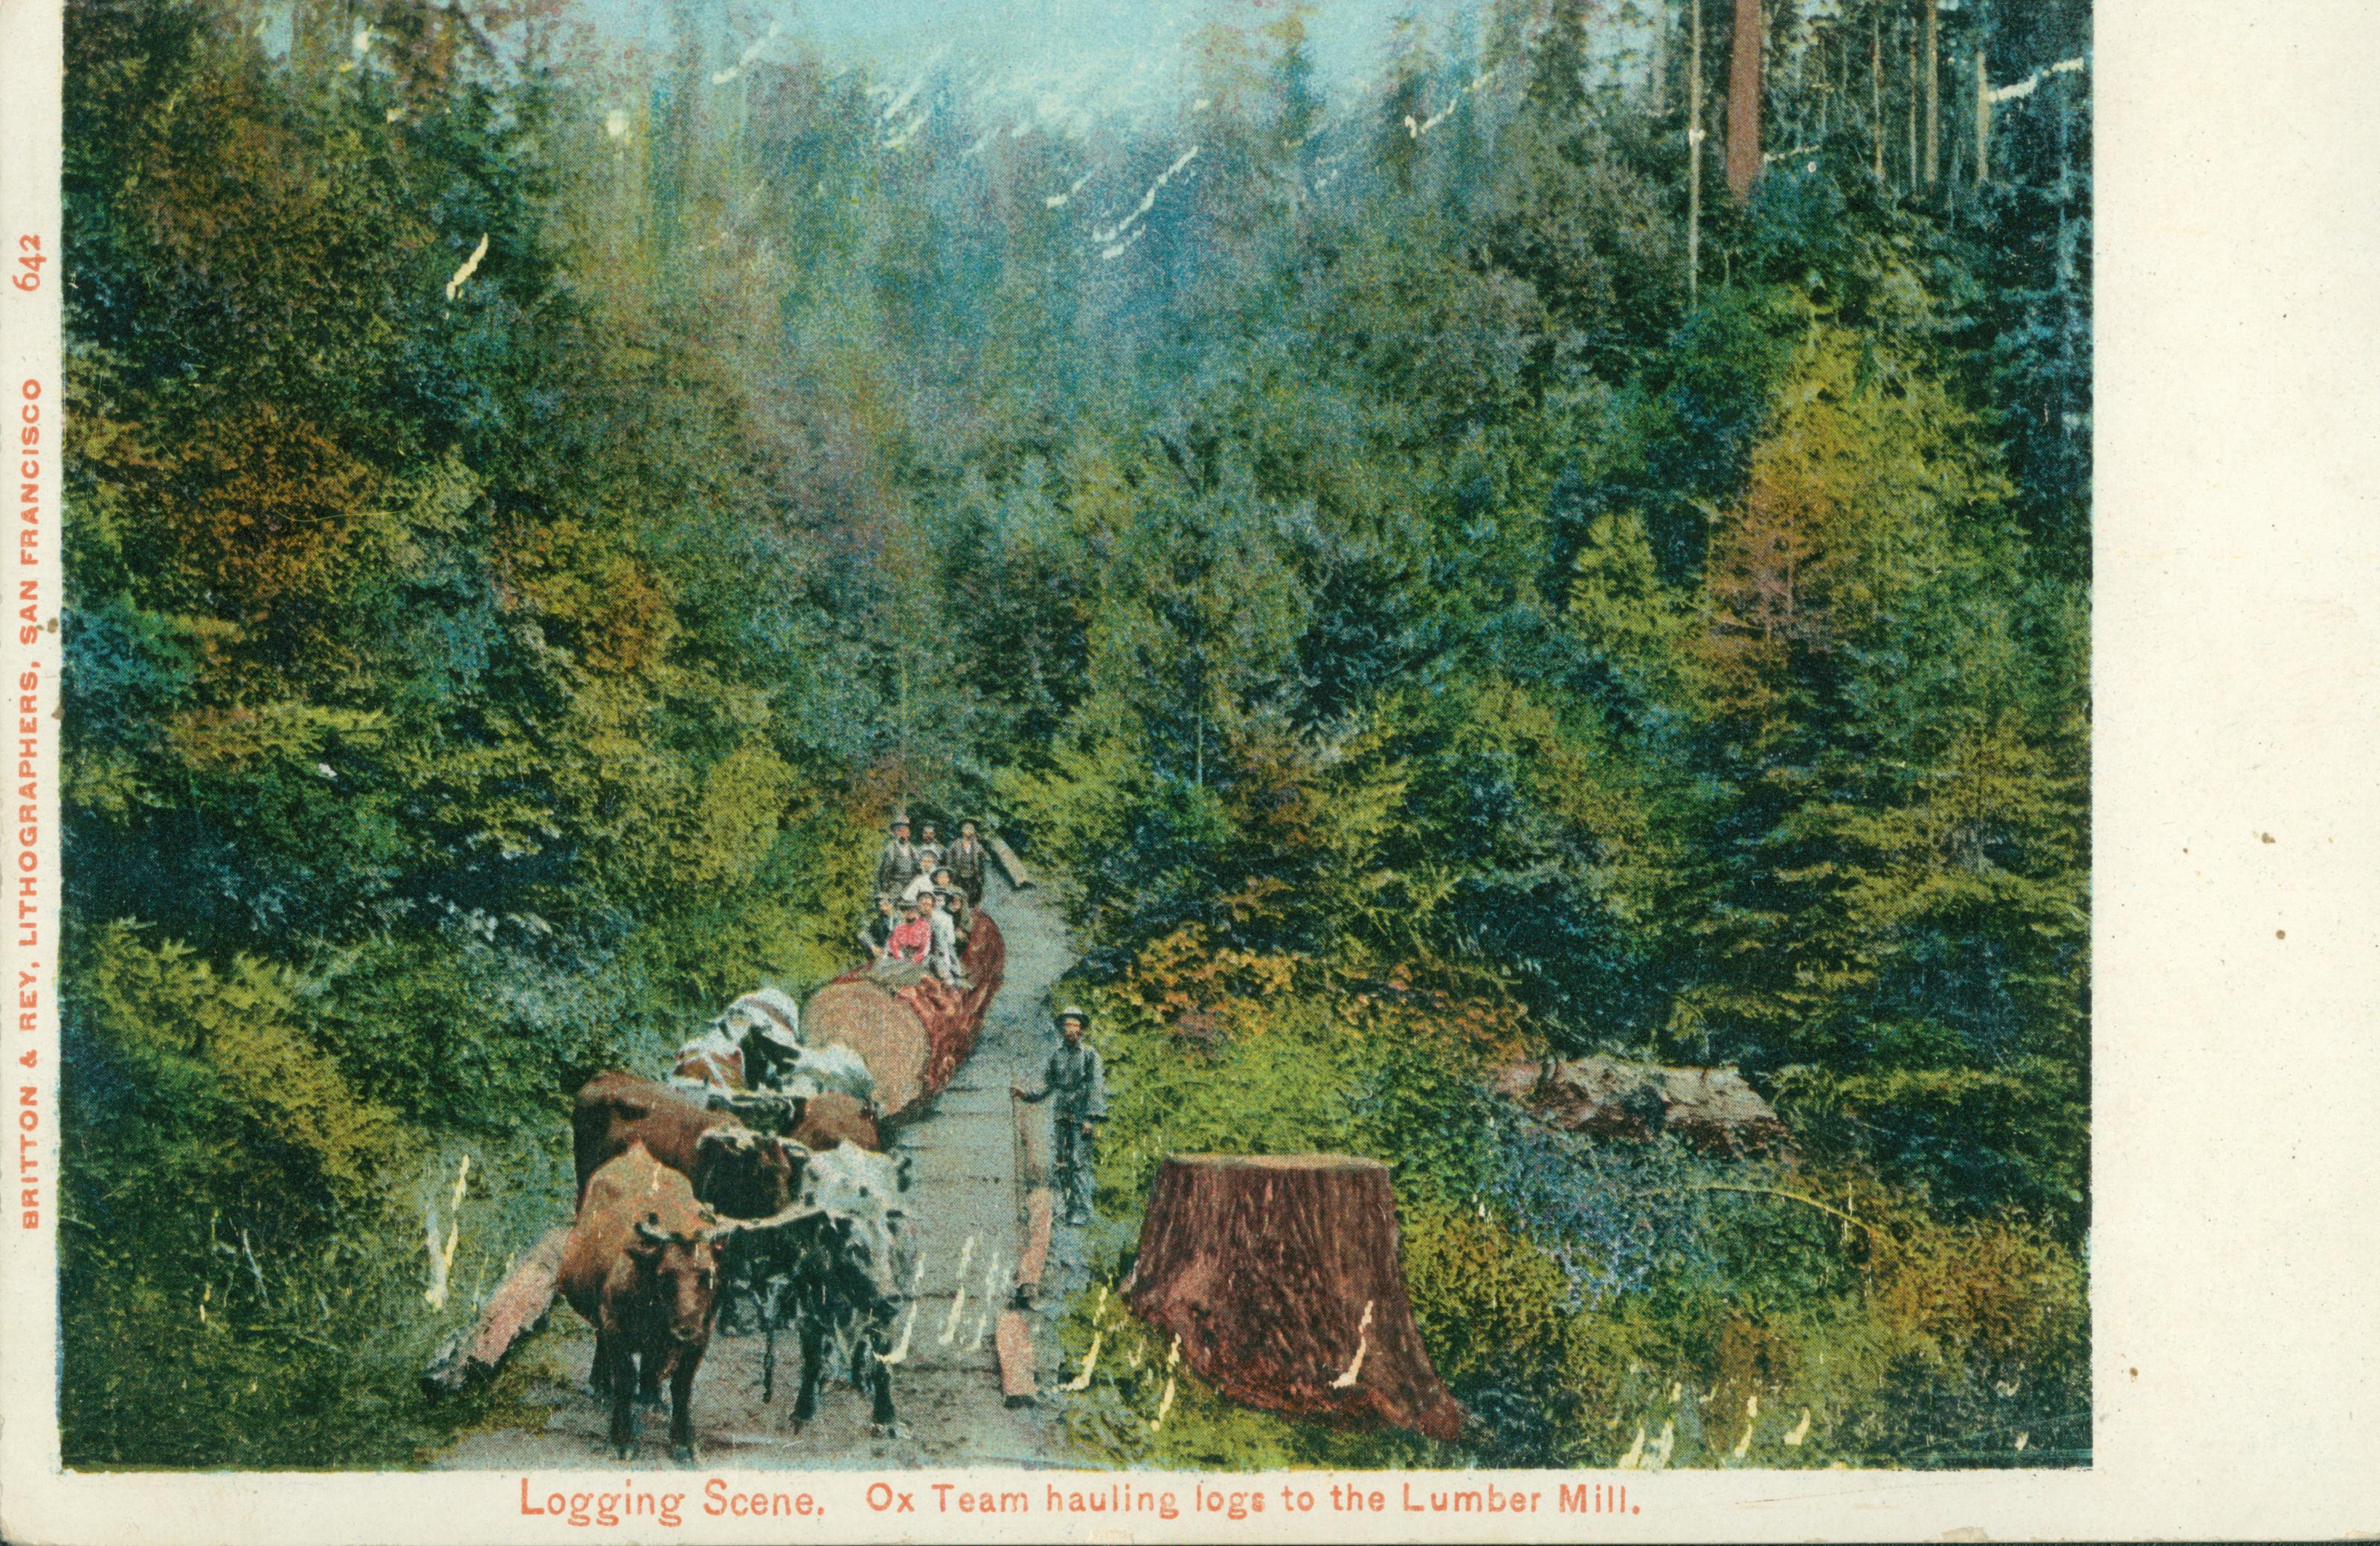 This postcard shows a team of cattle dragging a down a path